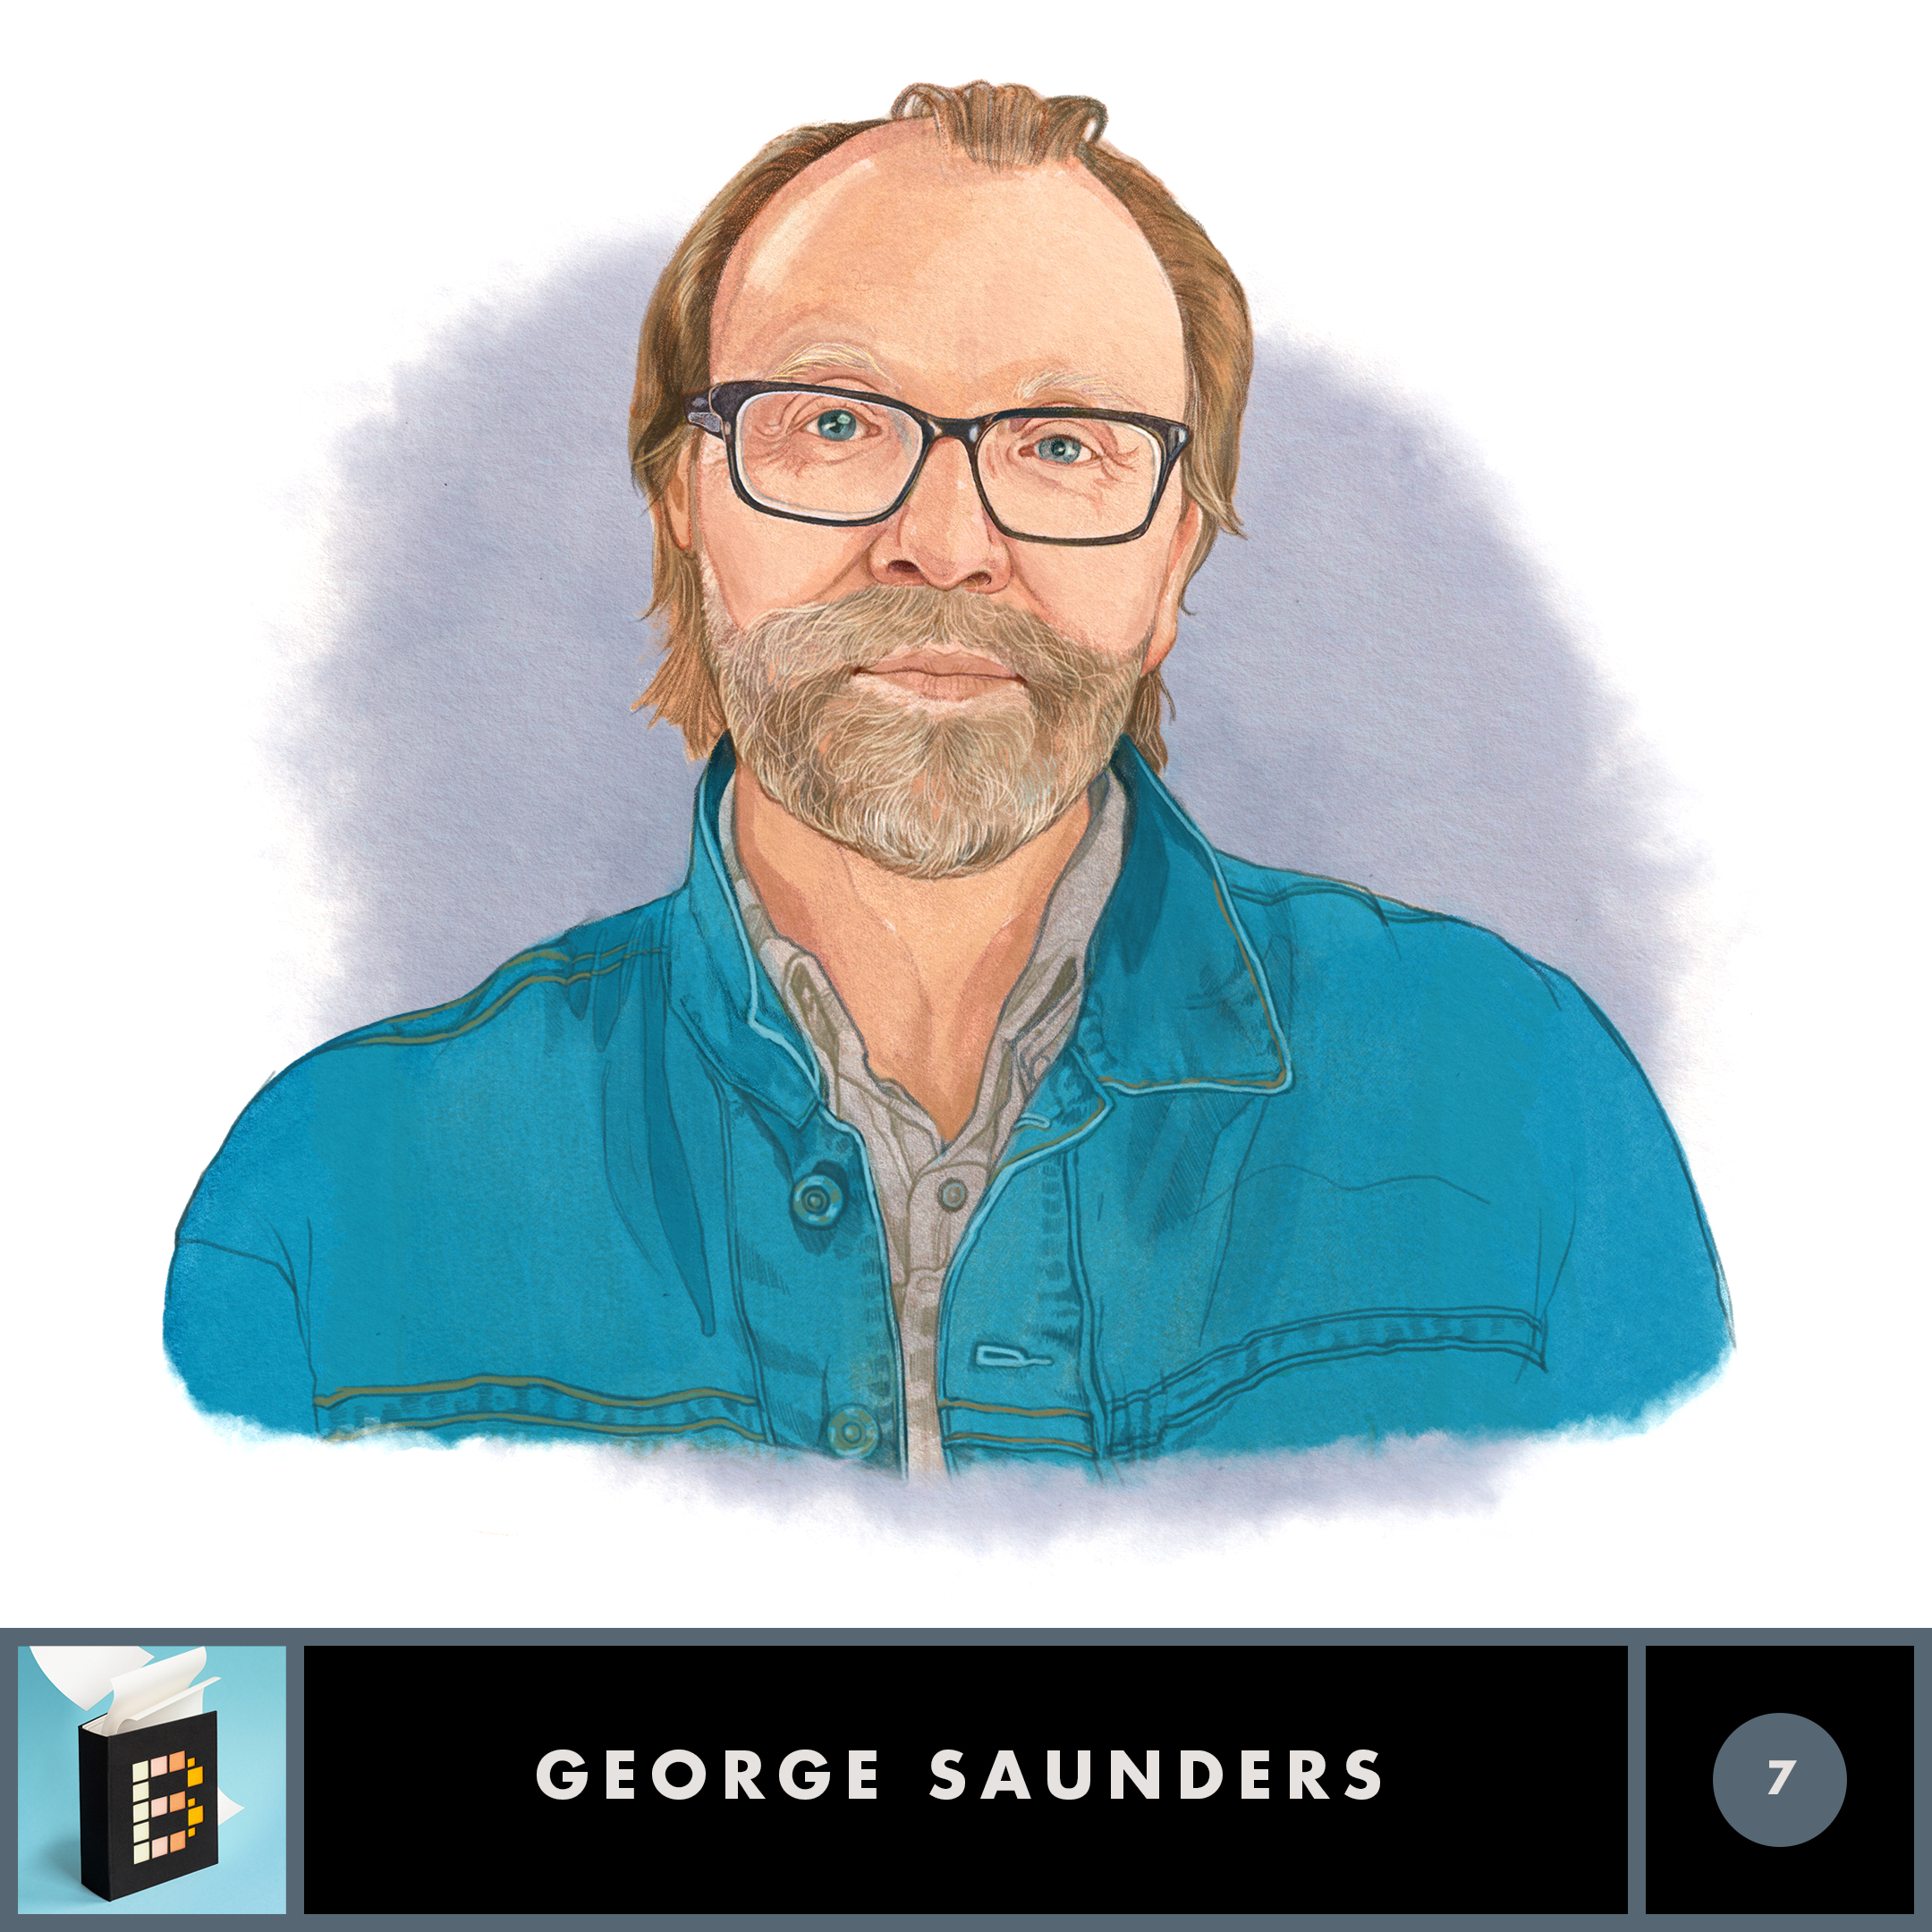 Why George Saunders Mixes Light and Dark